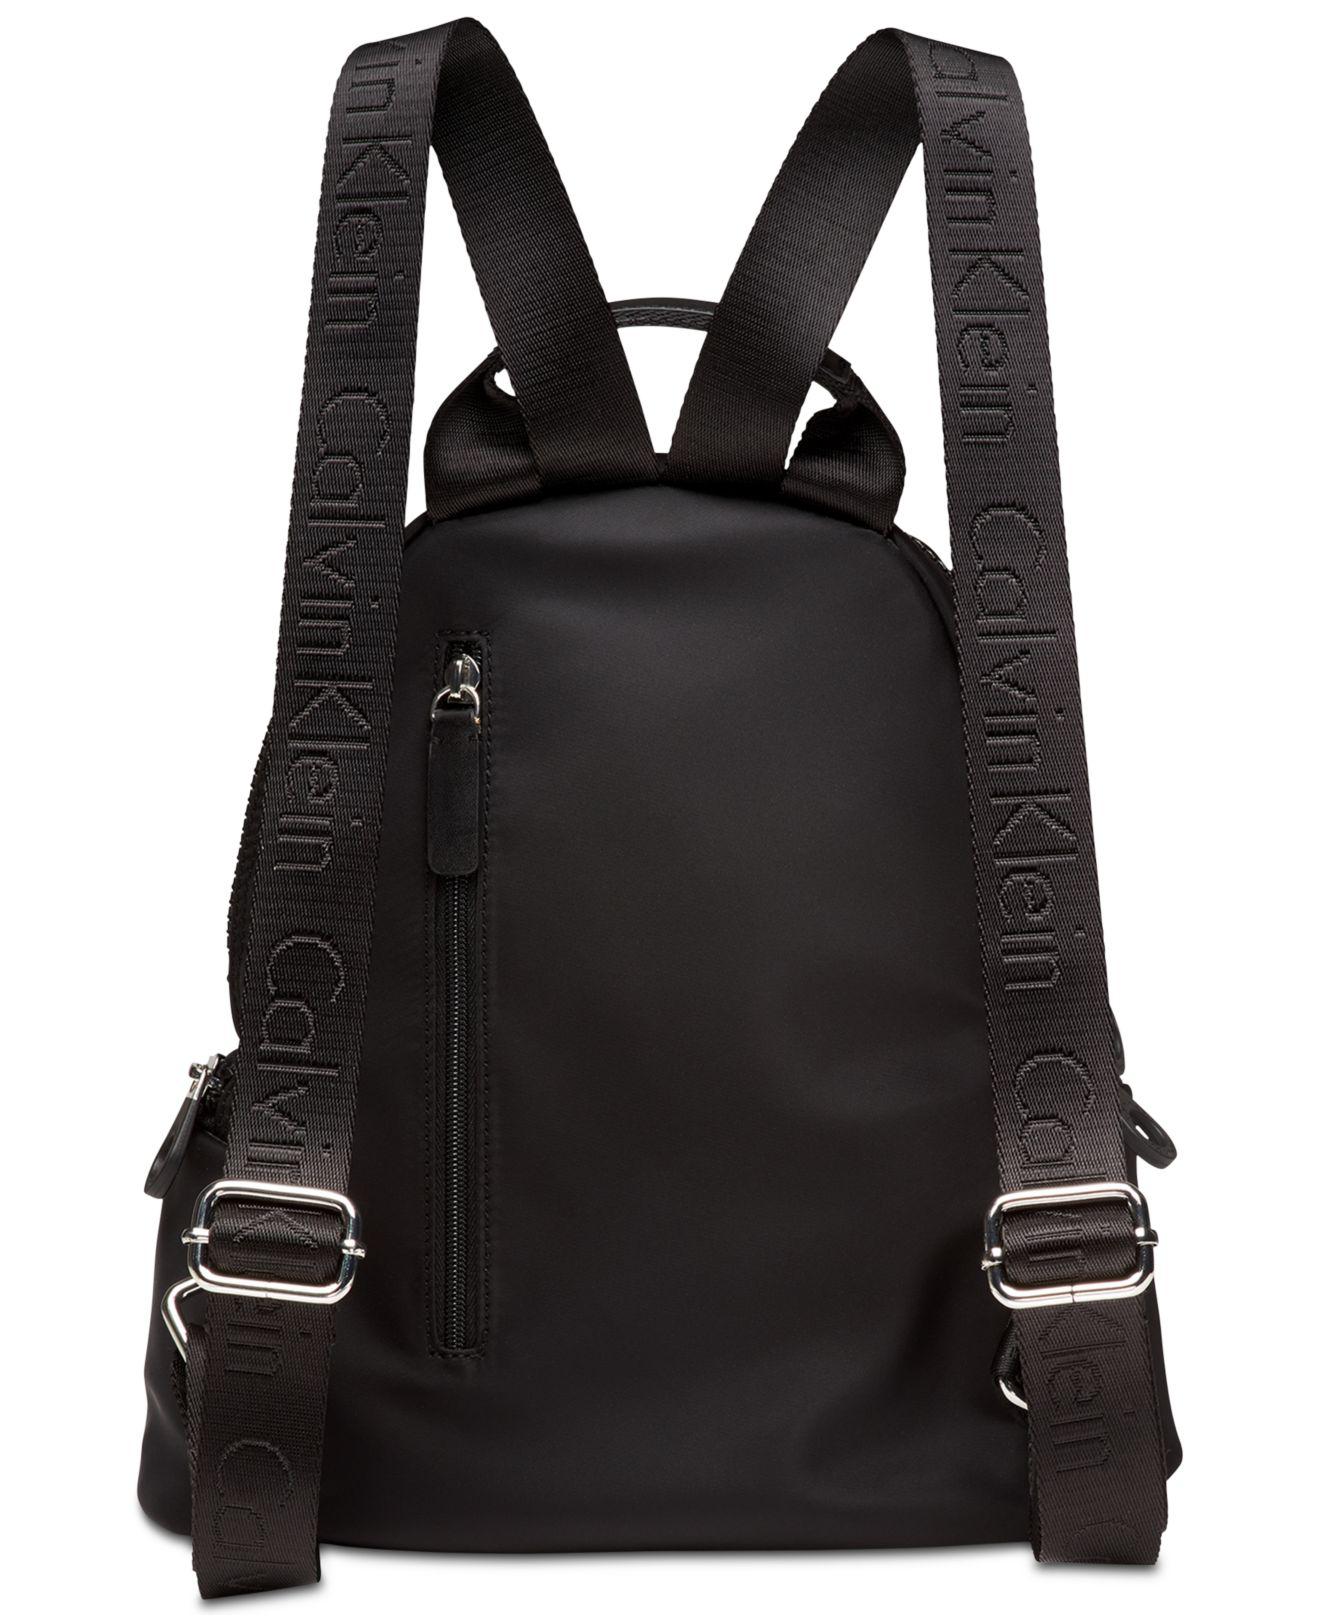 CALVIN KLEIN 205W39NYC Athleisure Small Nylon Backpack in Black